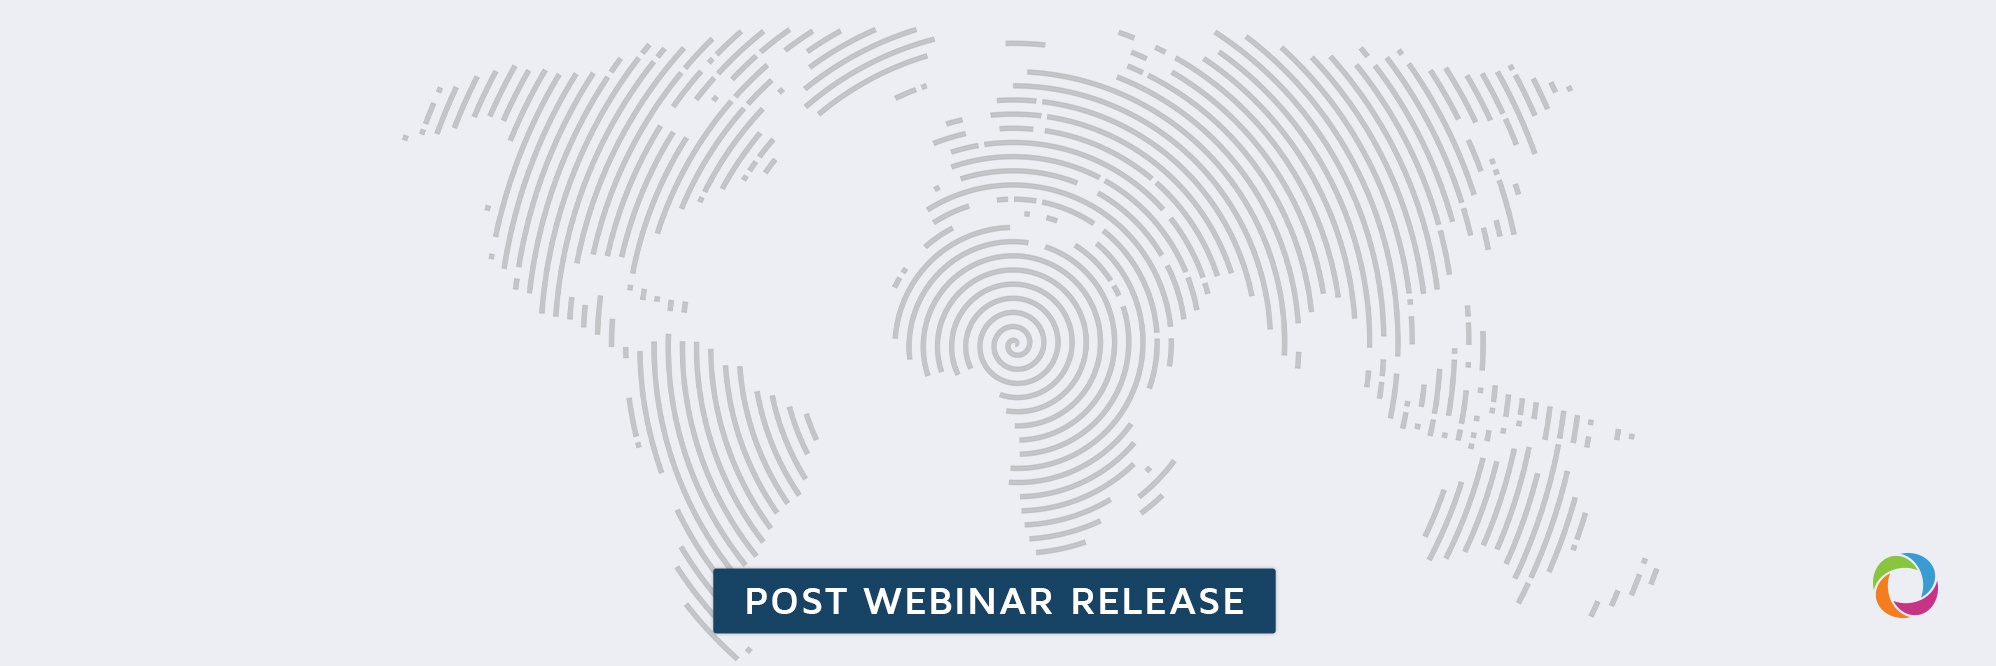 Exclusive Tips to Expand Your Impact by Becoming a Global Development Consultant | Post Webinar Release